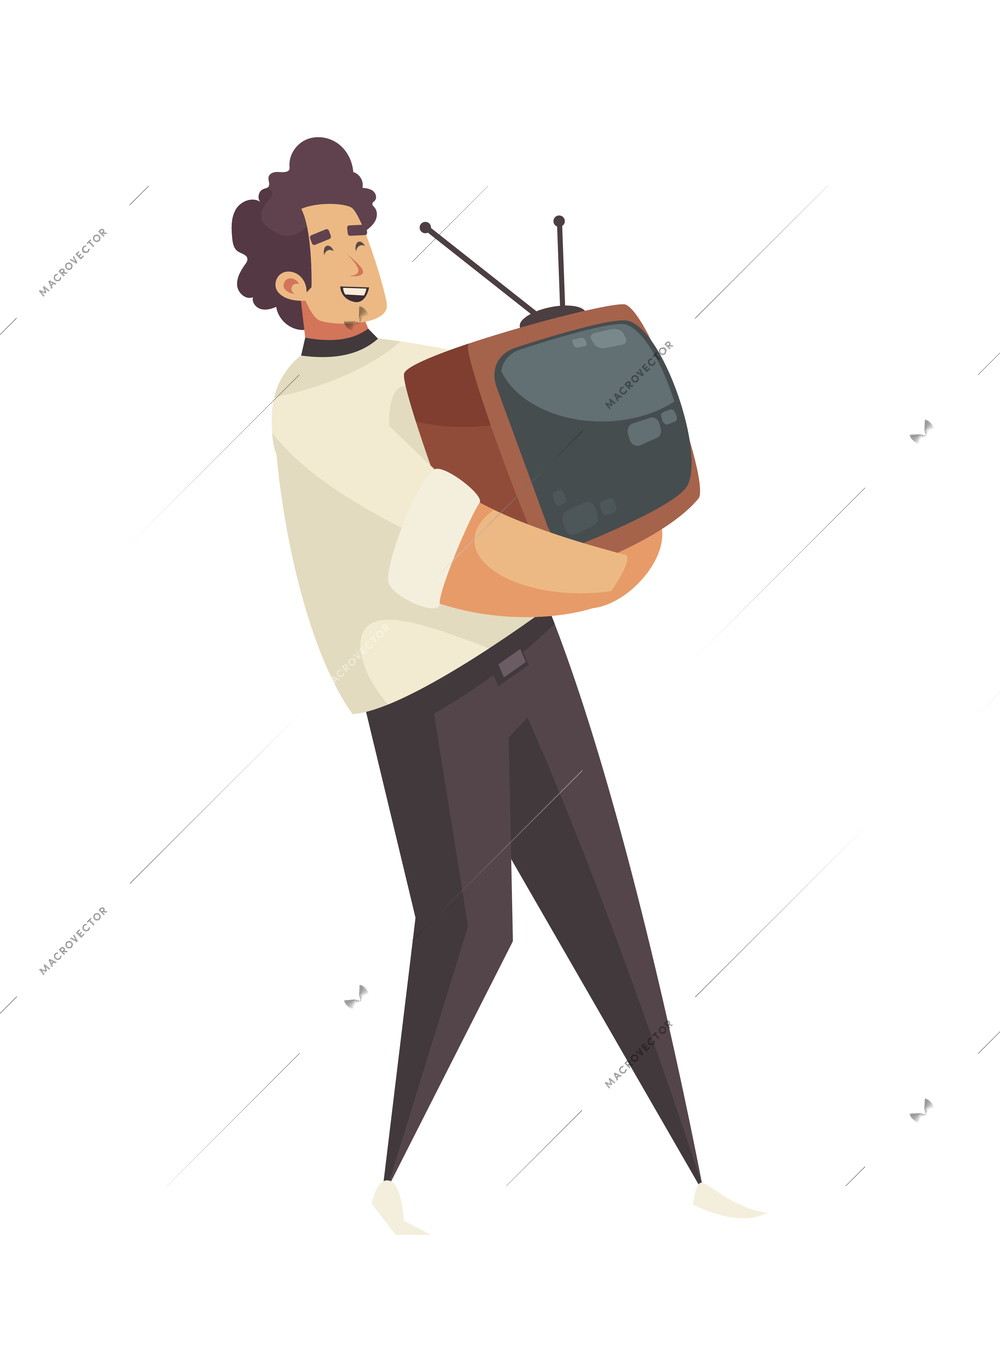 Garage sale items composition with doodle character of man carrying old tv vector illustration